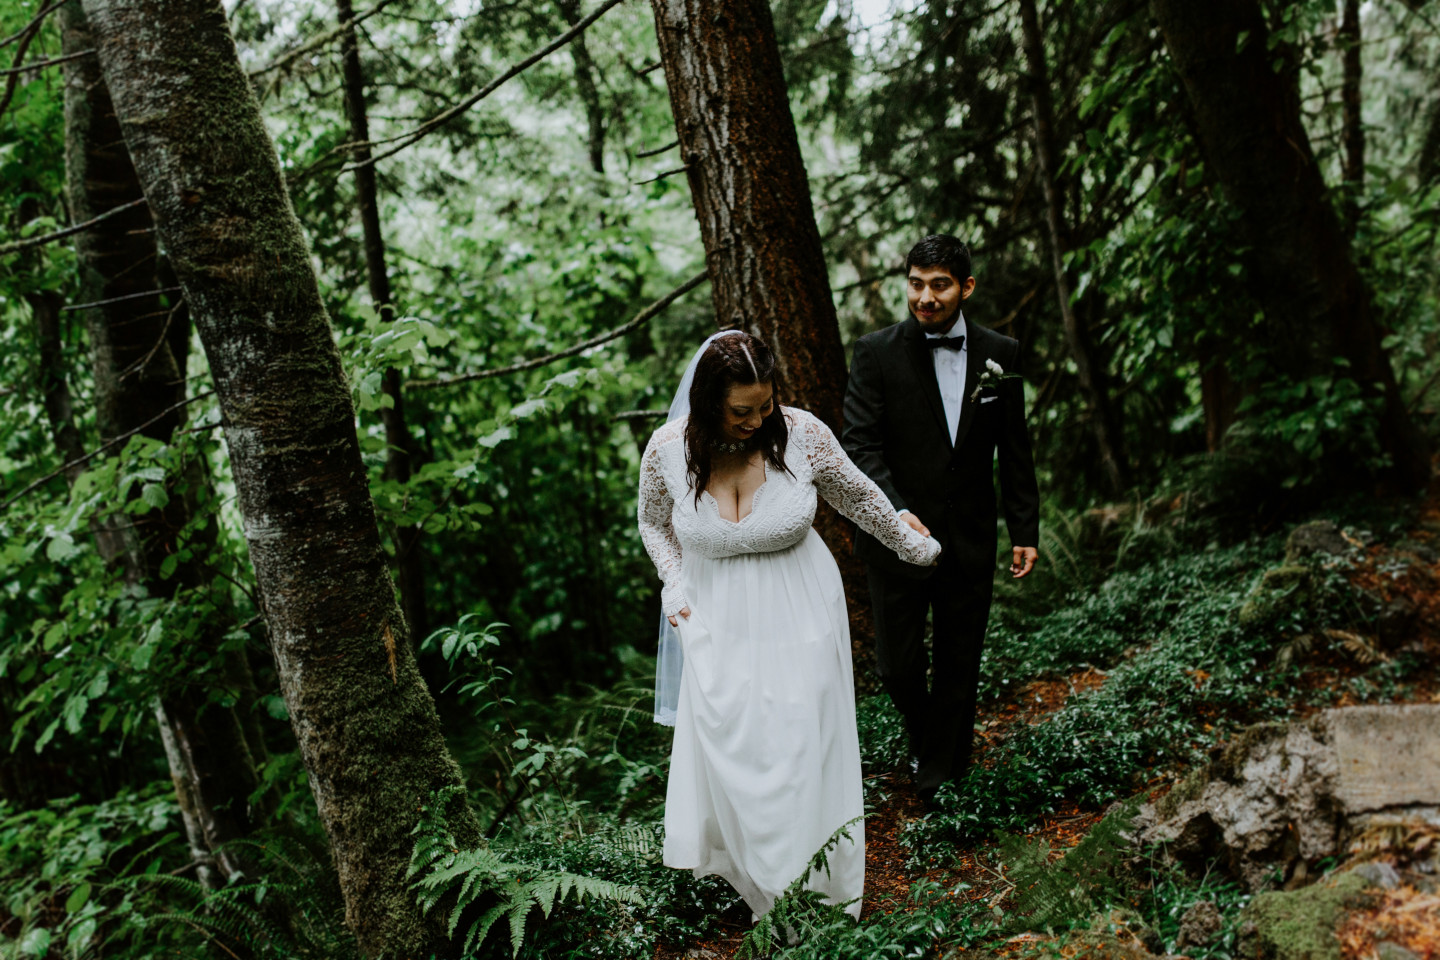 Sarah leads Sam through the forest at Skamania House, Washington. Elopement photography in Portland Oregon by Sienna Plus Josh.